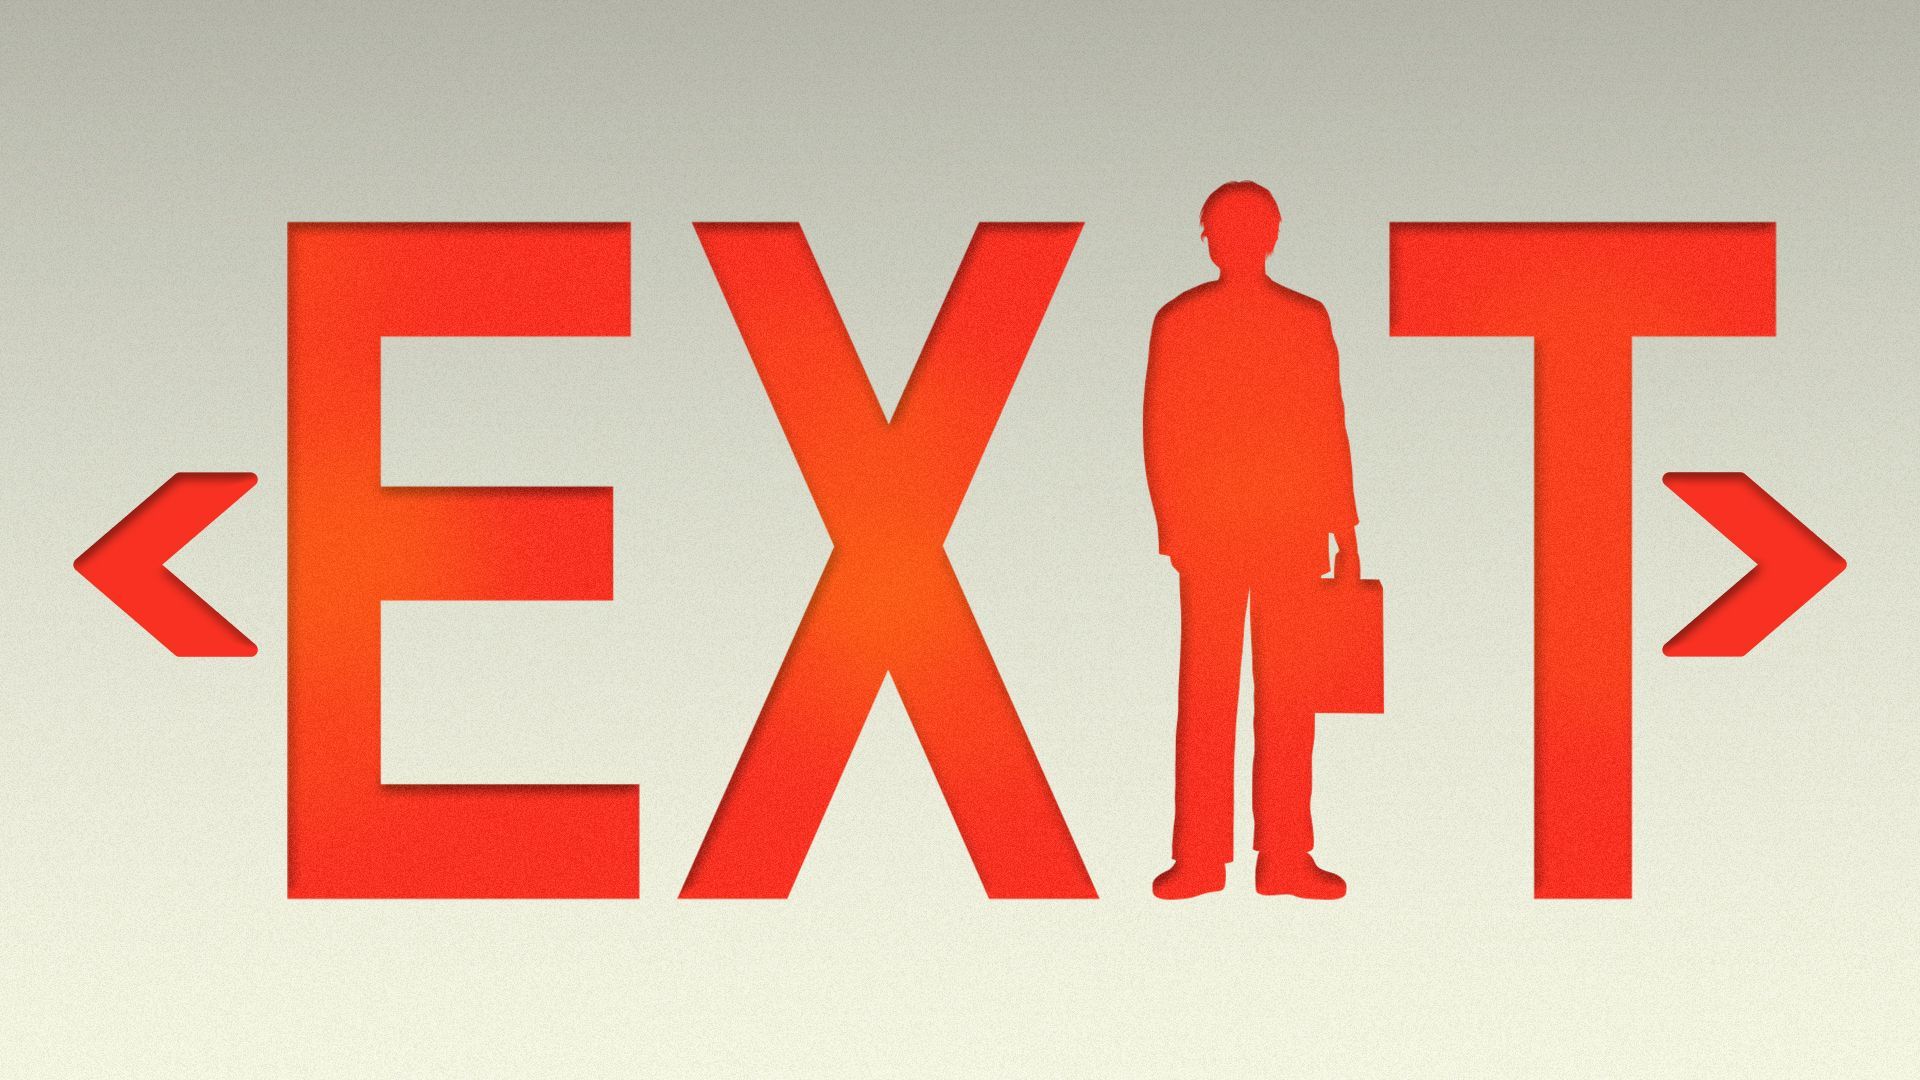 Illustration of an exit sign with a person's silhouette forming the "I". 